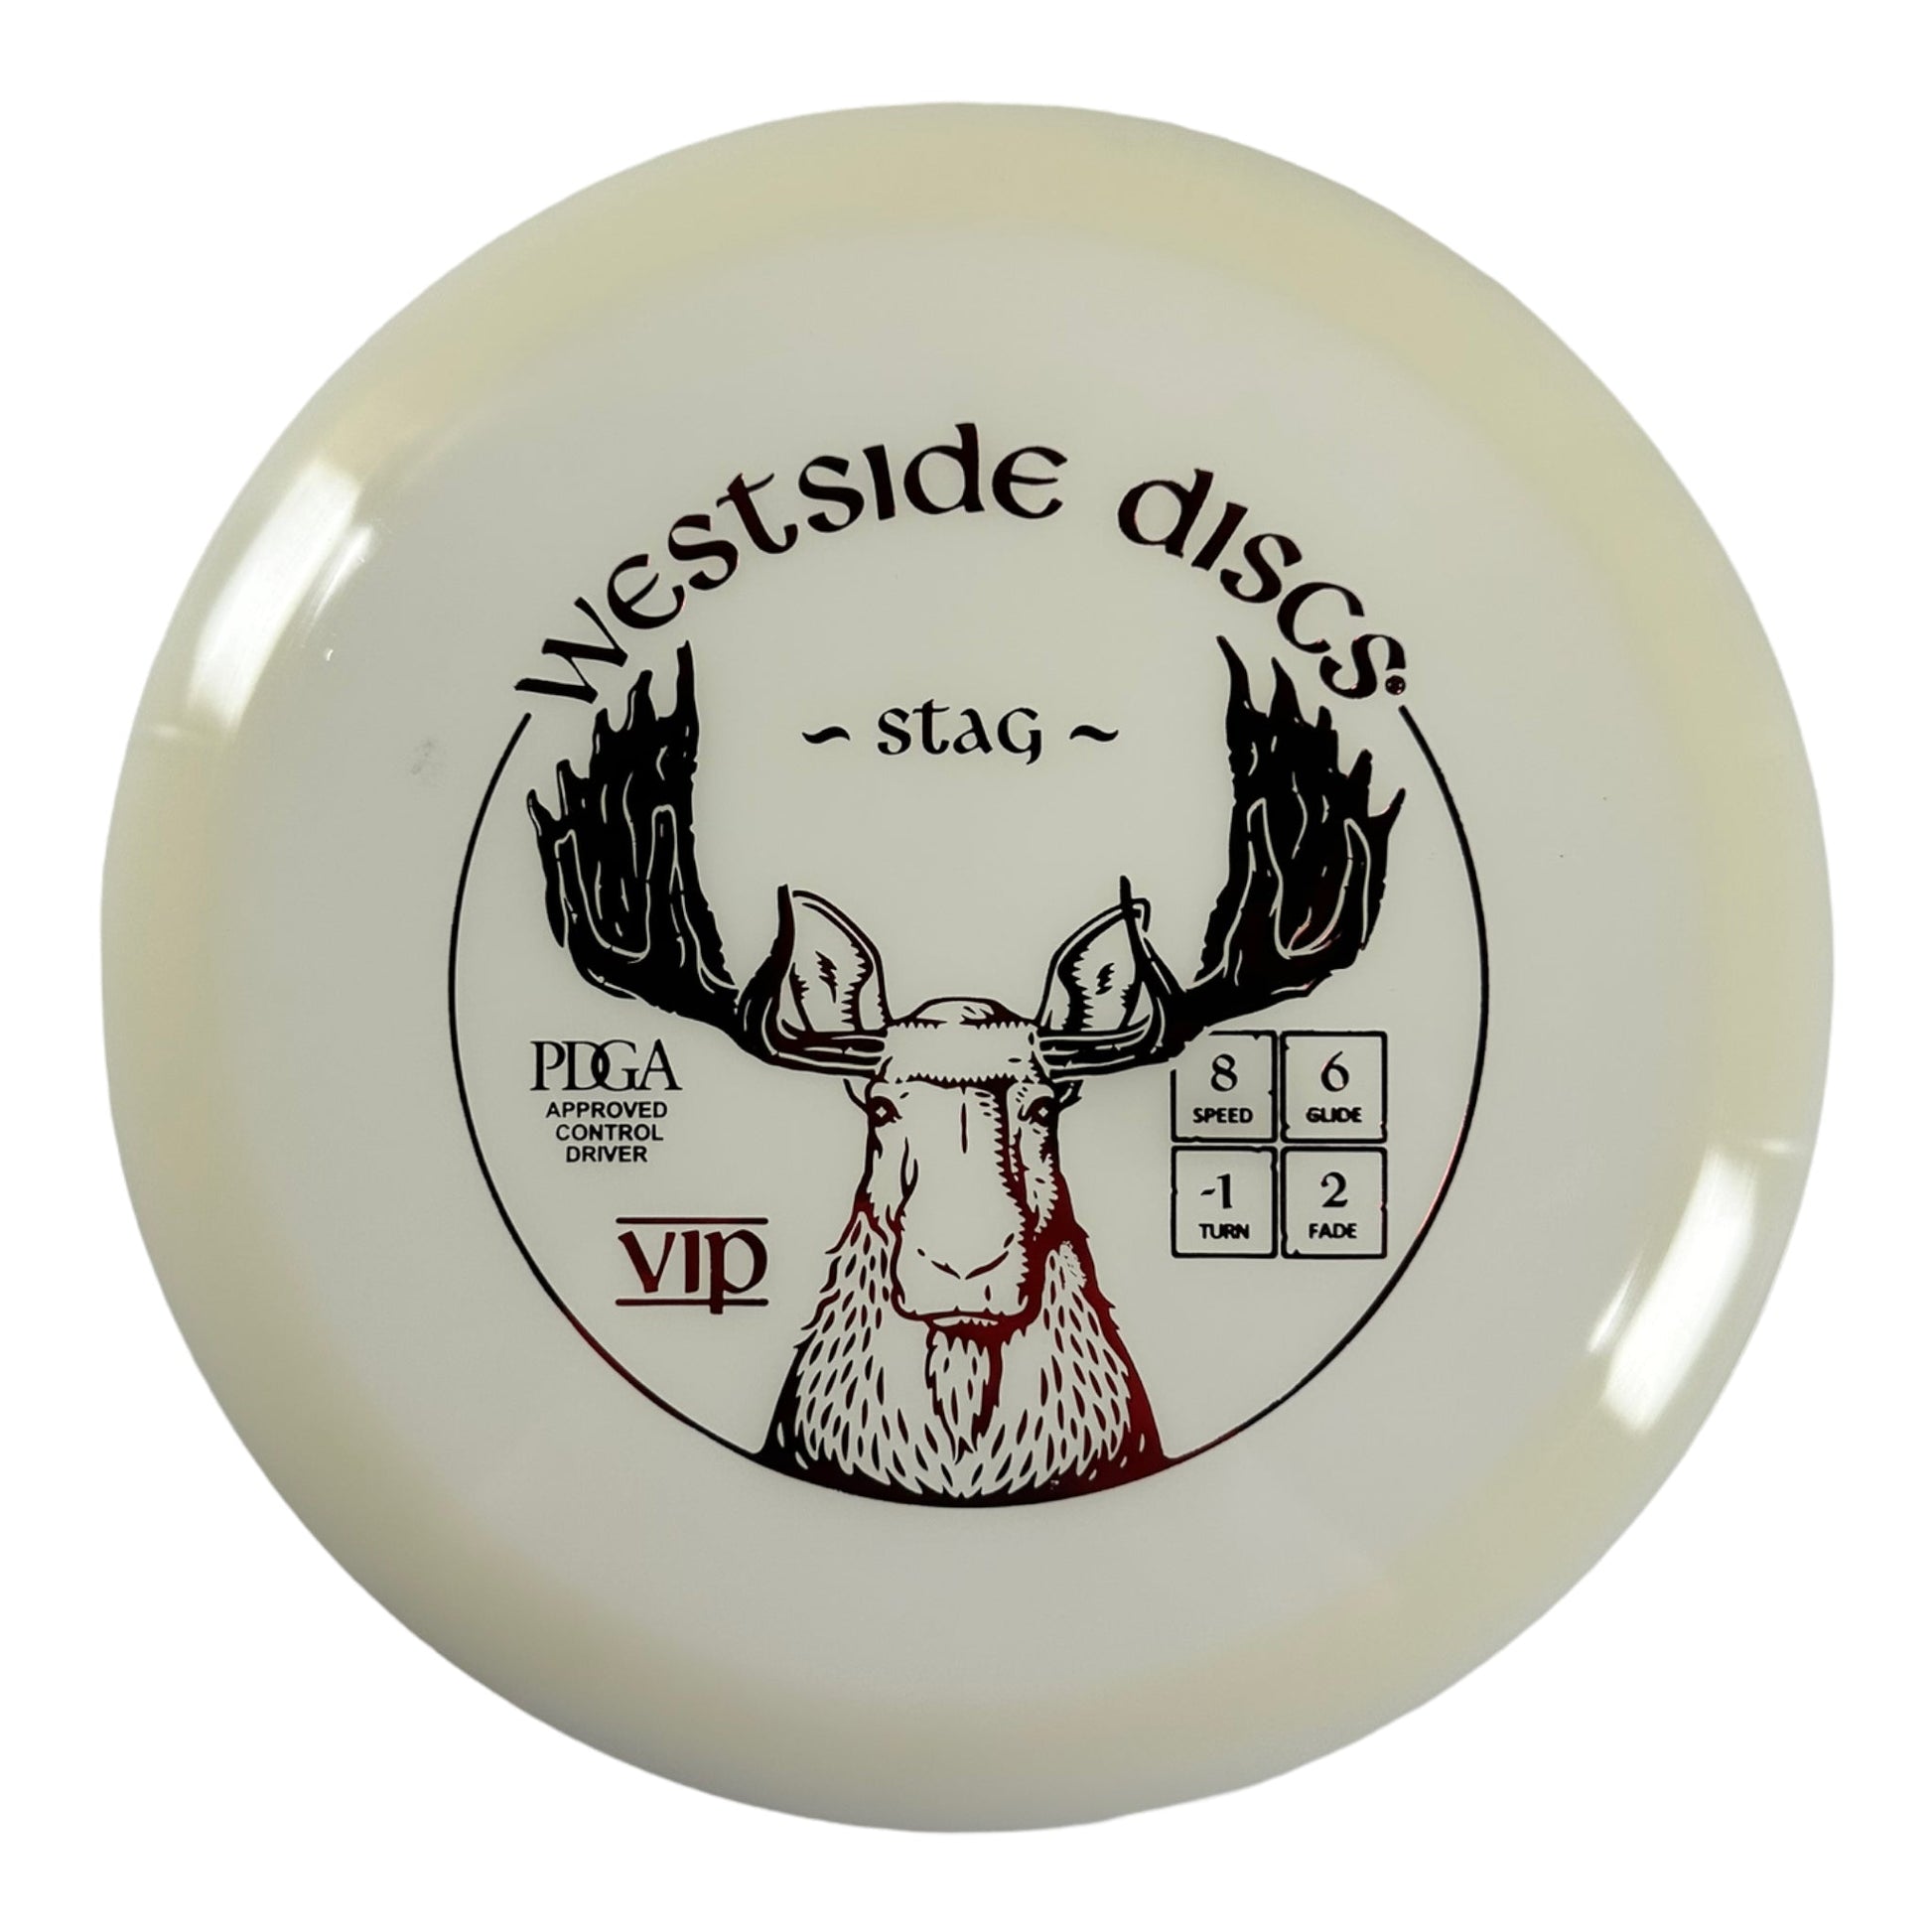 Westside Discs Stag | VIP | White/Red 170-172g Disc Golf